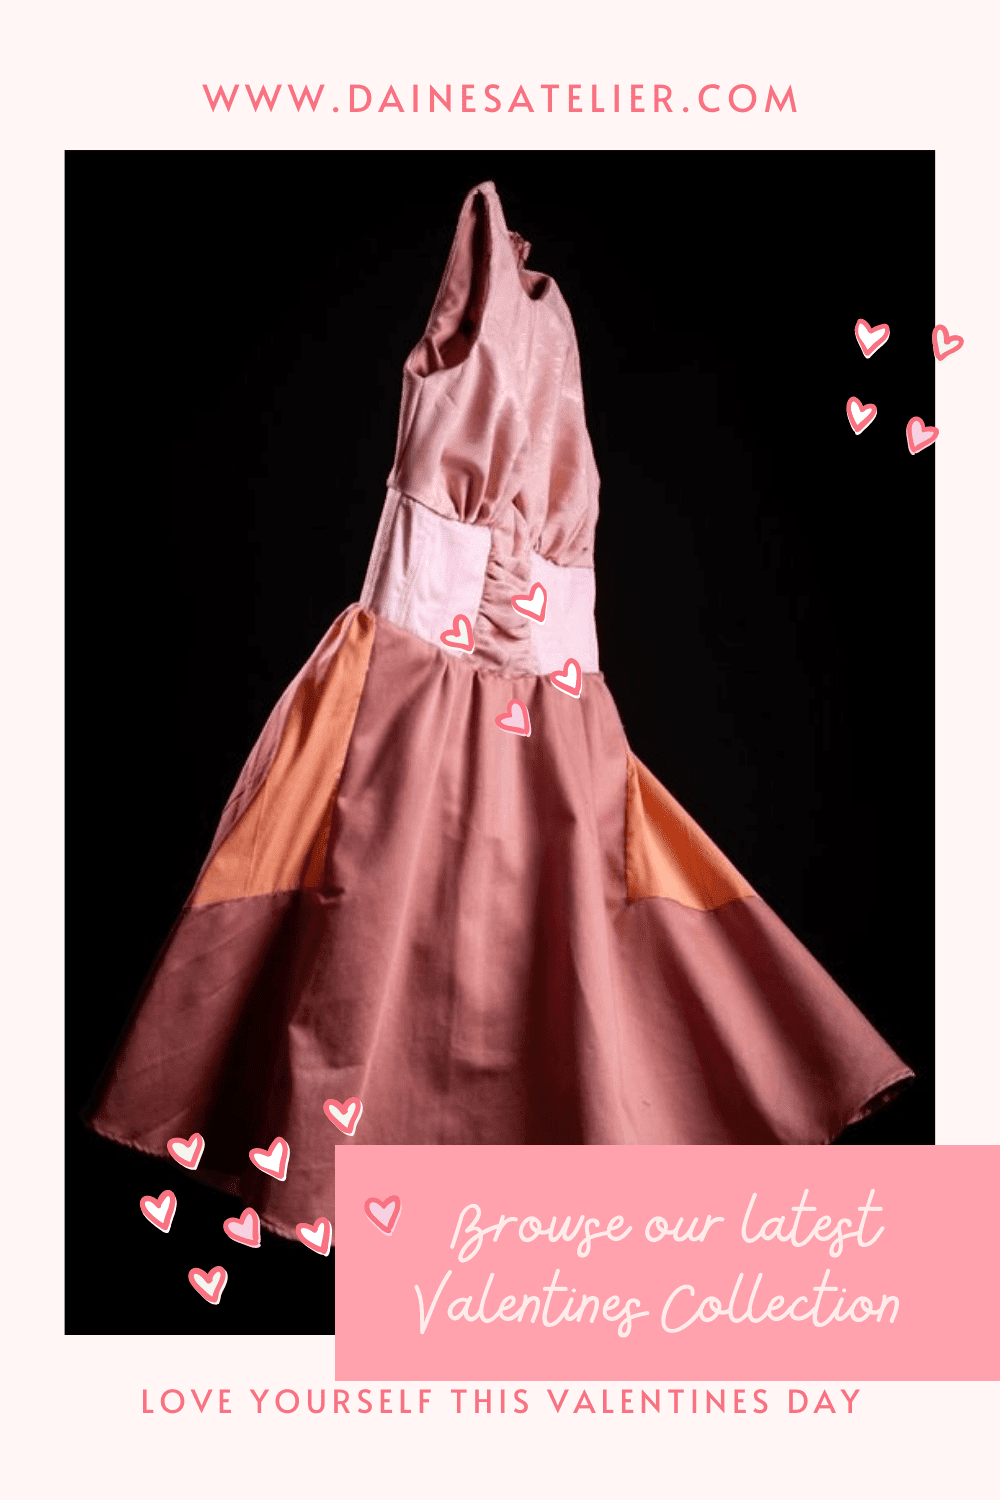 Image of pink floating dress for the Valentines collection featuring half corset and circle skirt.